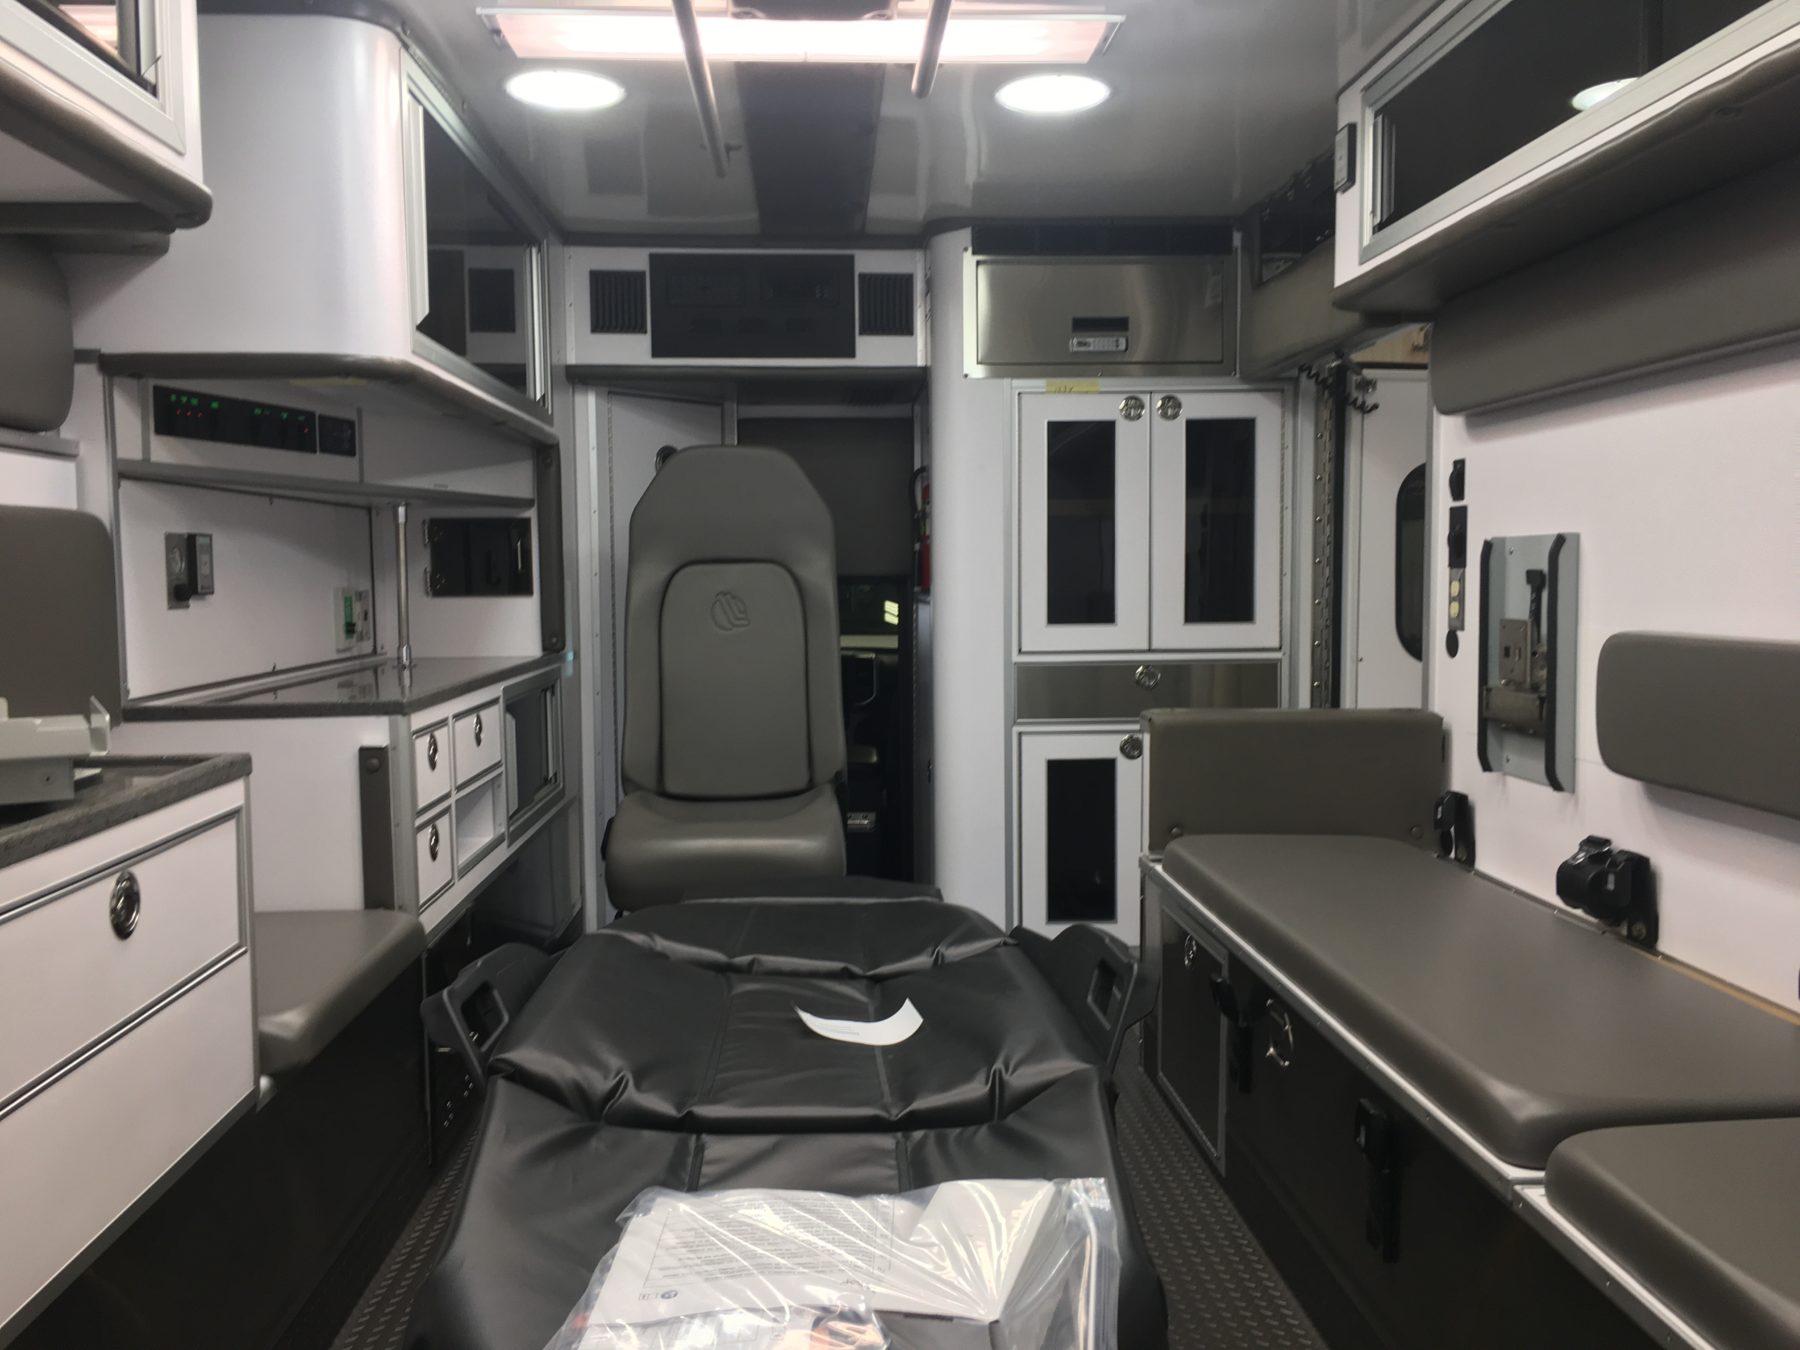 2020 Ram 4500 4x4 Heavy Duty Ambulance For Sale – Picture 4